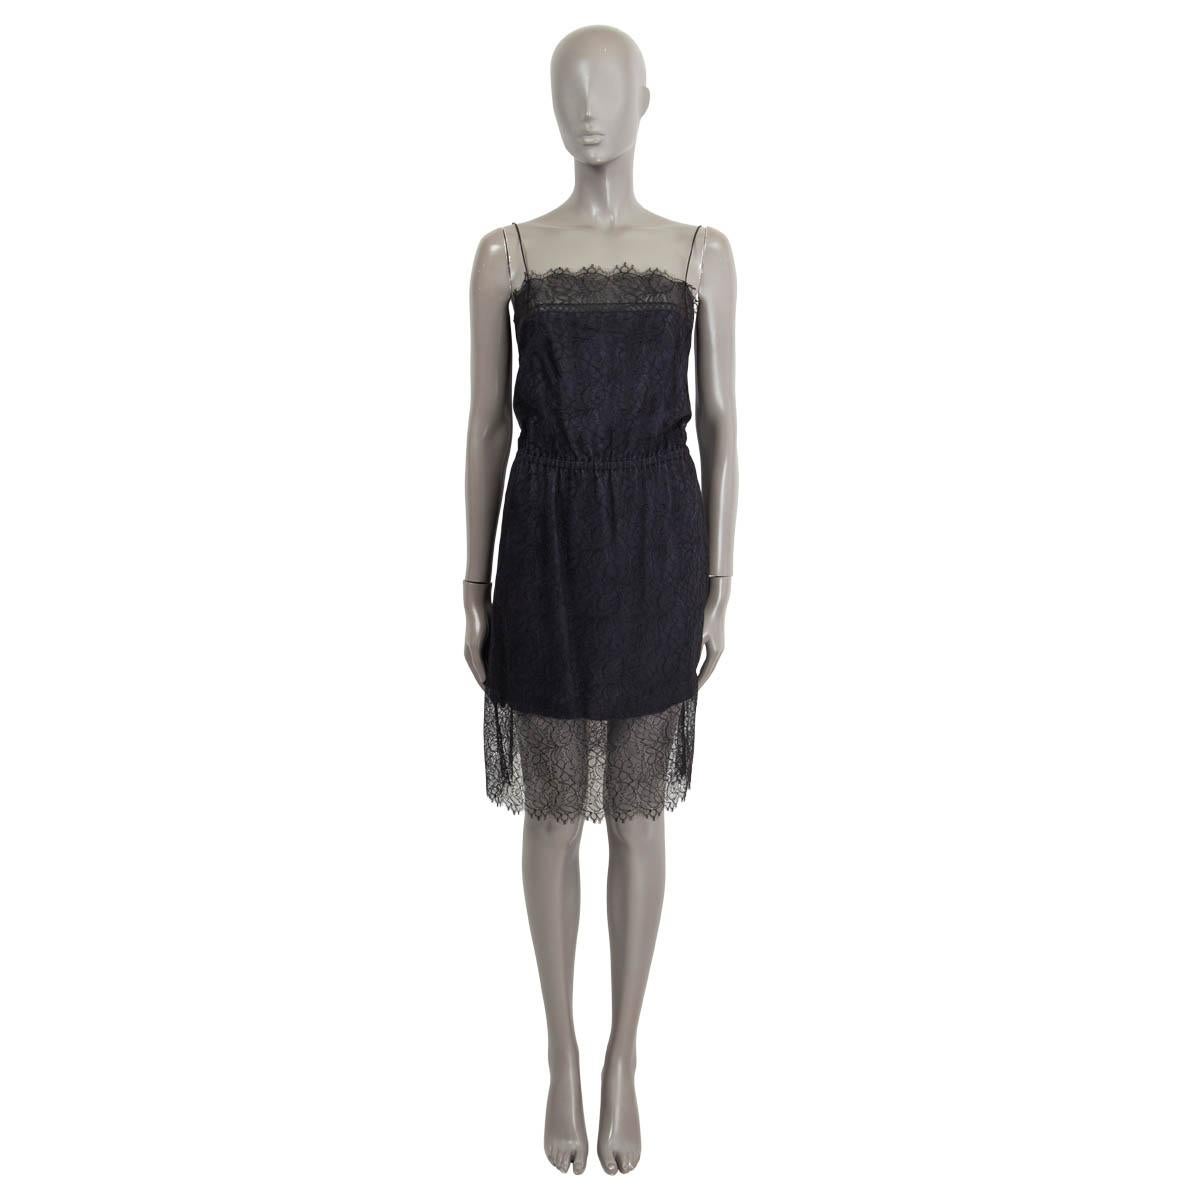 100% authentic Chanel sleeveless chantilly lace mini dress in black and navy polyamide (47%), viscose (41%) and cotton (13%). Opens with two 'CC' buttons, a hook and a zipper on the back. Lined in navy blue silk and elastane (assumed cause tag is